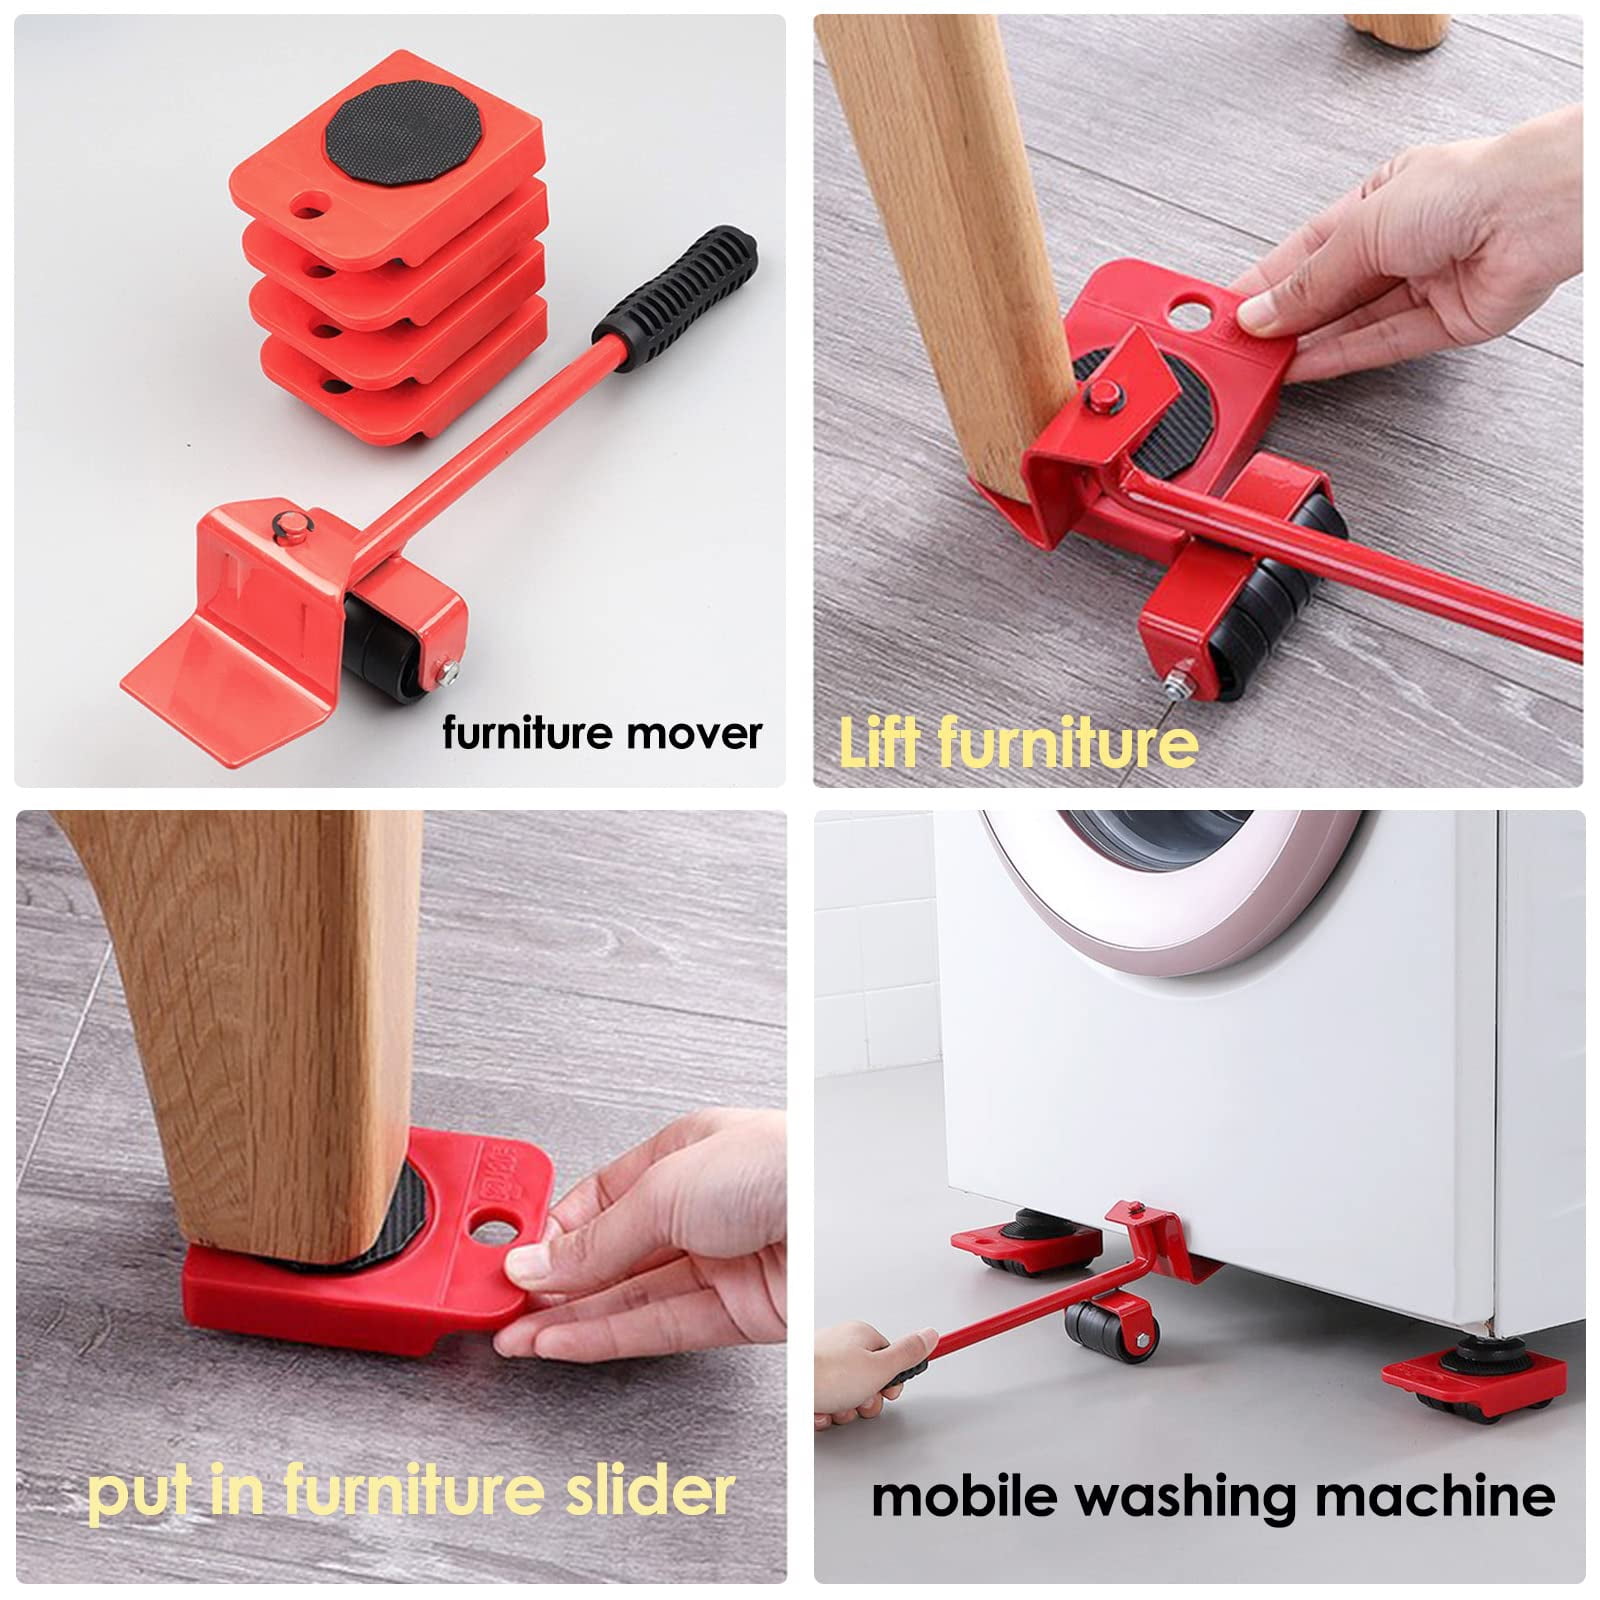 Furniture Lifter Rollers Gravity Heavy Furniture Appliance Lifter Mobile  Mover Sliders Dolly Rollers Arm Tool Set